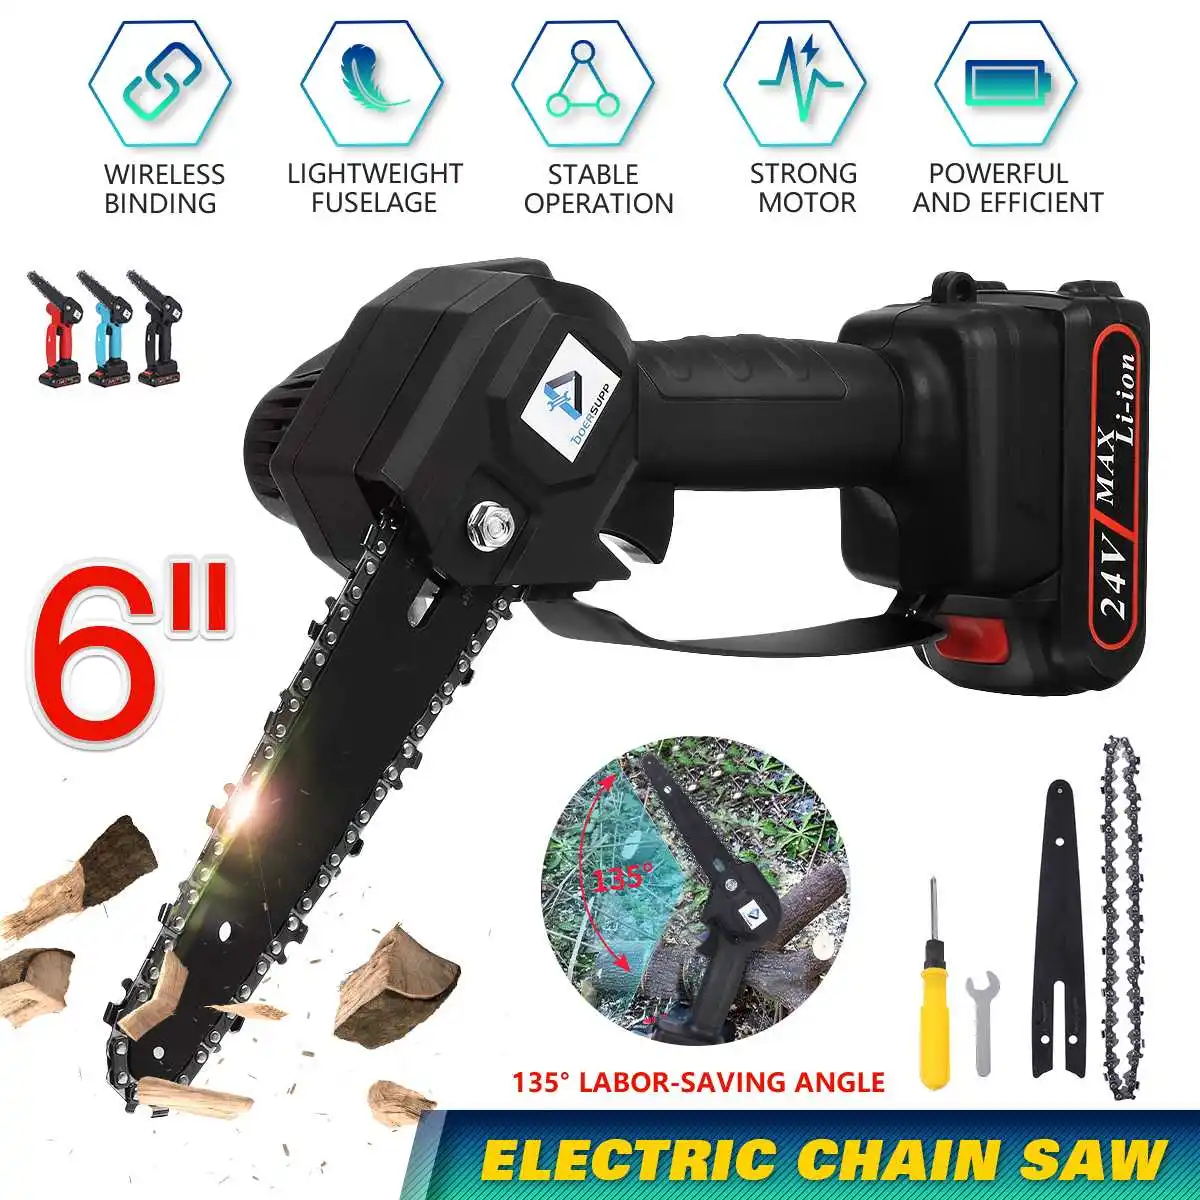 

6 Inch 1500W Electric Chain Saw Garden Pruning Logging Labor Saving Wireless Tree Logging Trimming Saw Woodworking Power Tools